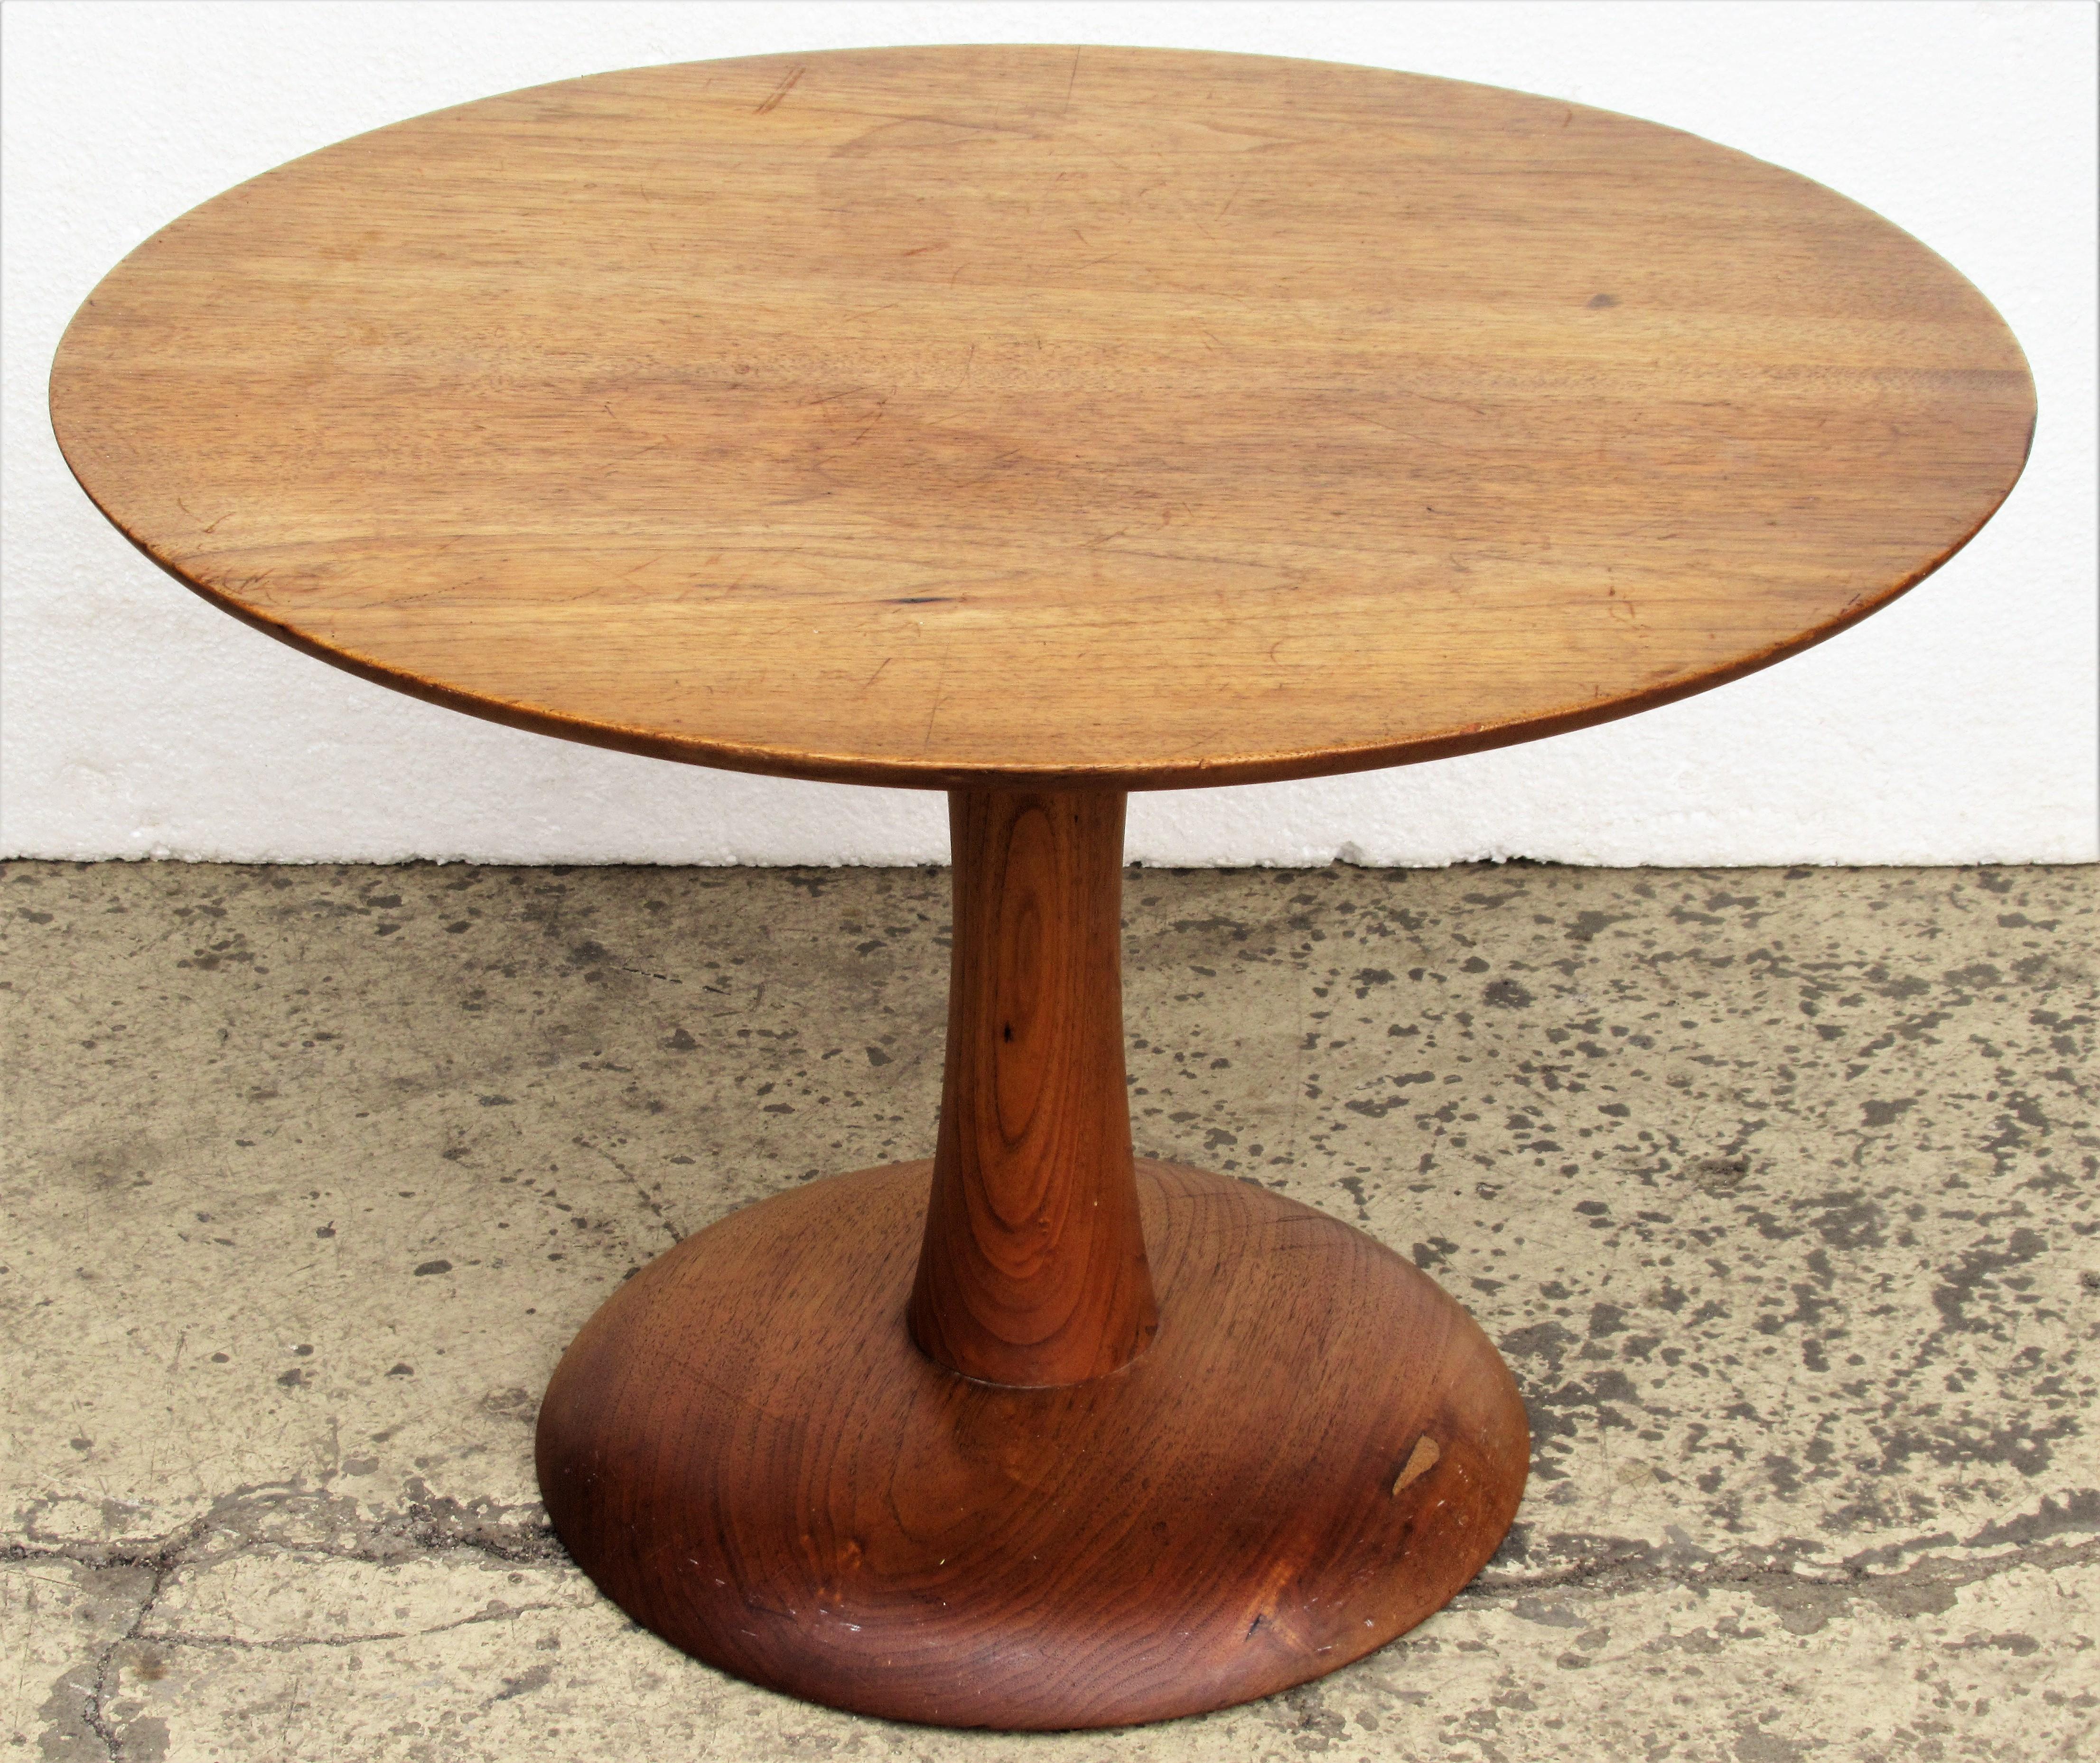 1970s American studio craft movement turned wood circular pedestal table with nice old color, beautiful graining and a great looking simple organic modernist design. Signed on underside. Wendell Smith - 1974. Wendell Smith was one of the three